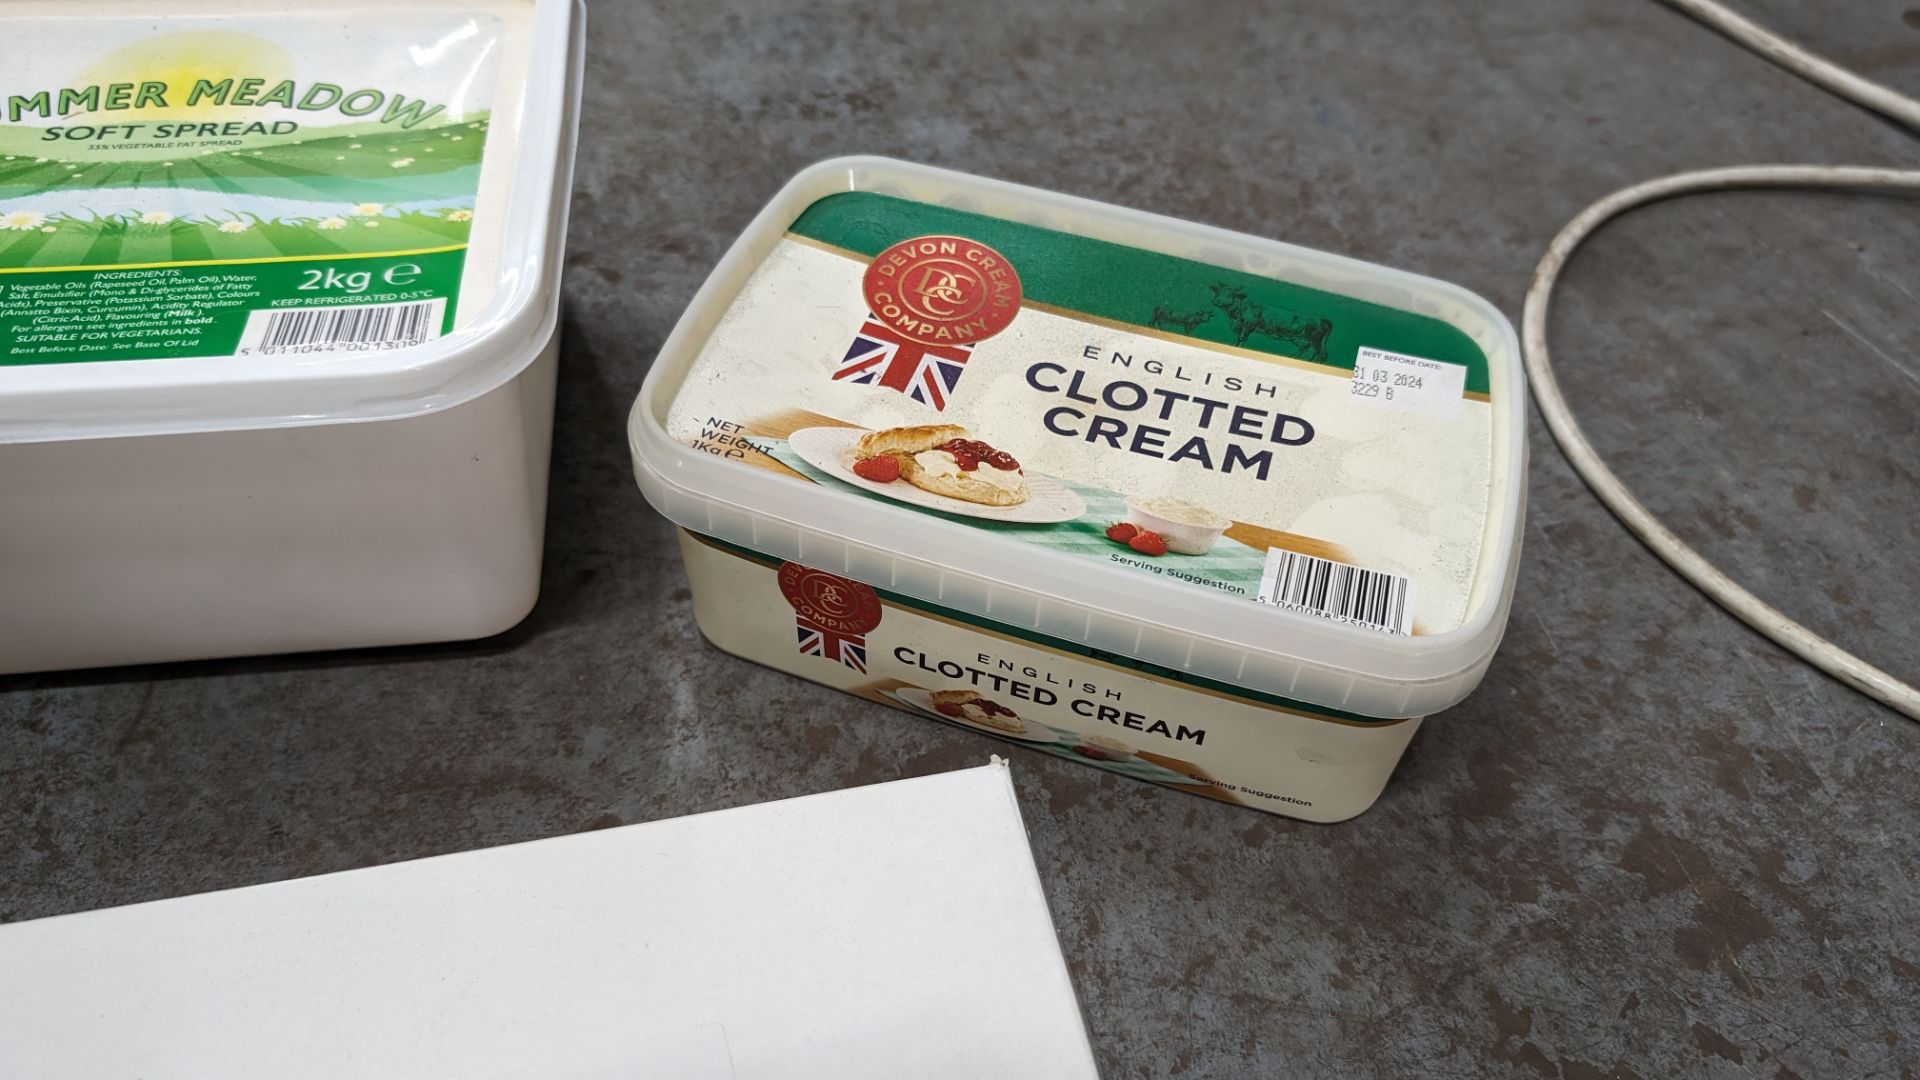 2 off 2kg tubs of Summer Meadow soft spread plus box of Meadow Churn individual packets of butter (1 - Image 5 of 6